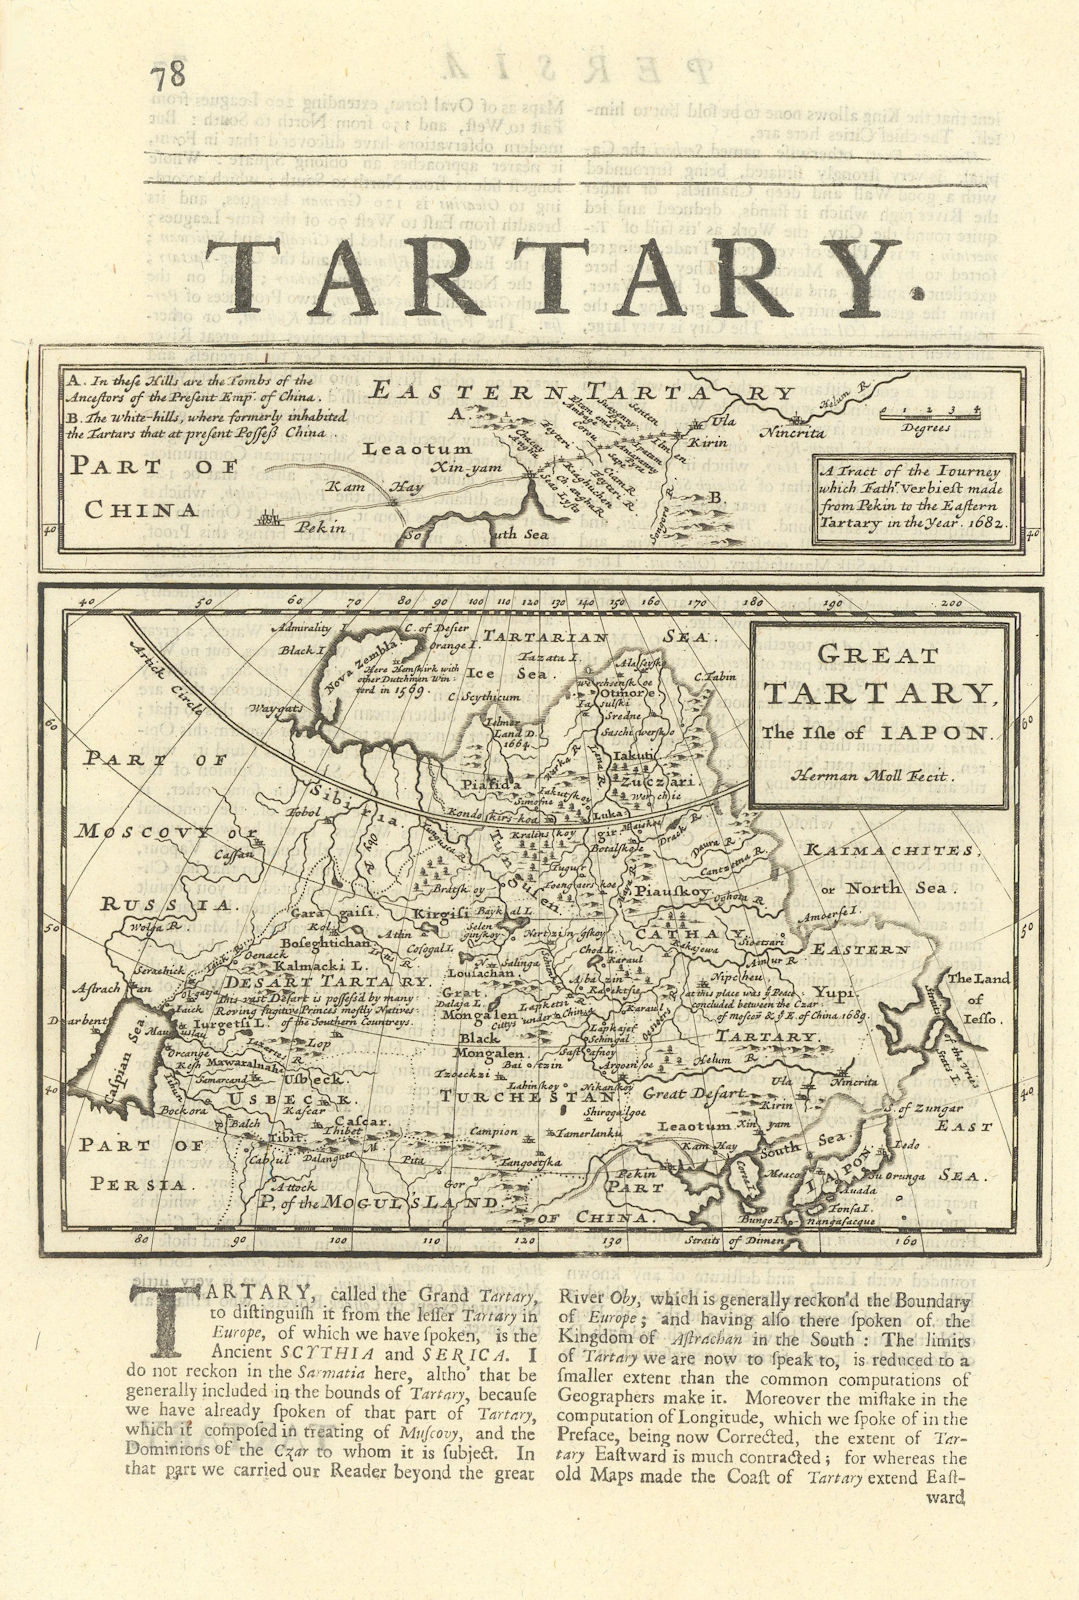 Associate Product Great Tartary, the Isle of Iapon by Herman Moll. Central Asia & Japan 1709 map